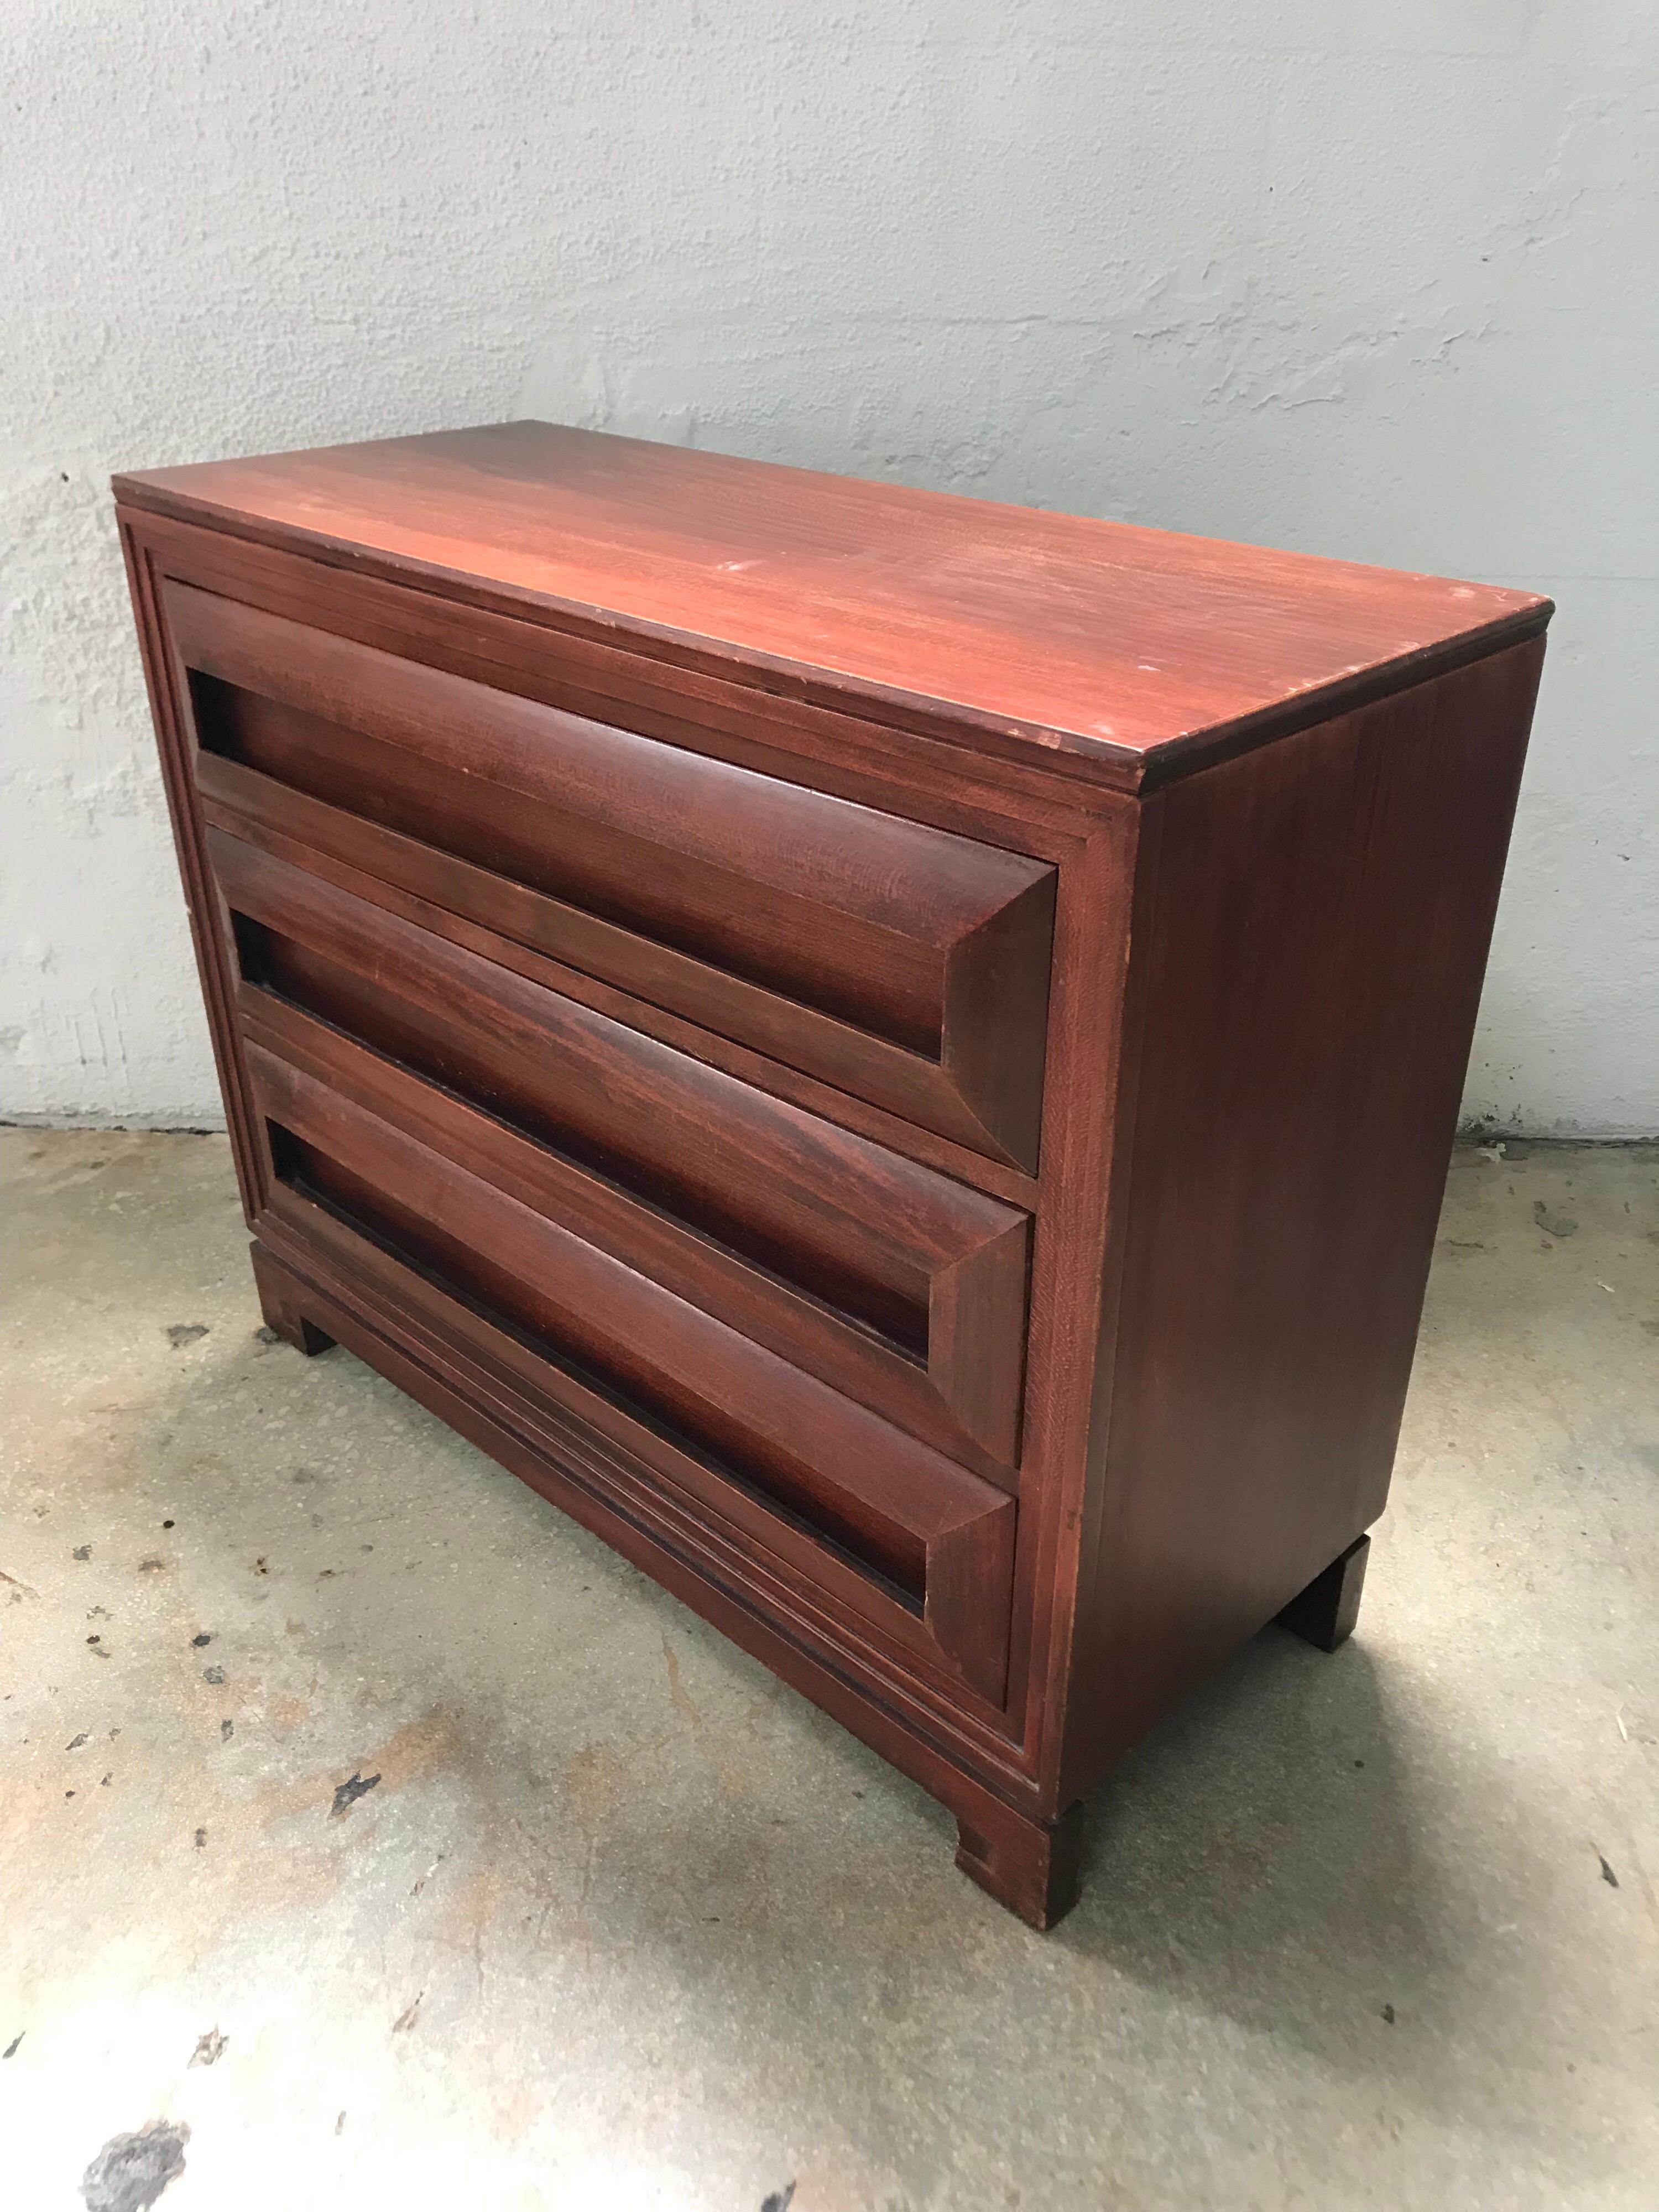 Petite mahogany chest of drawers or dresser with inset handles, fully incased with a stepped edge detail.

